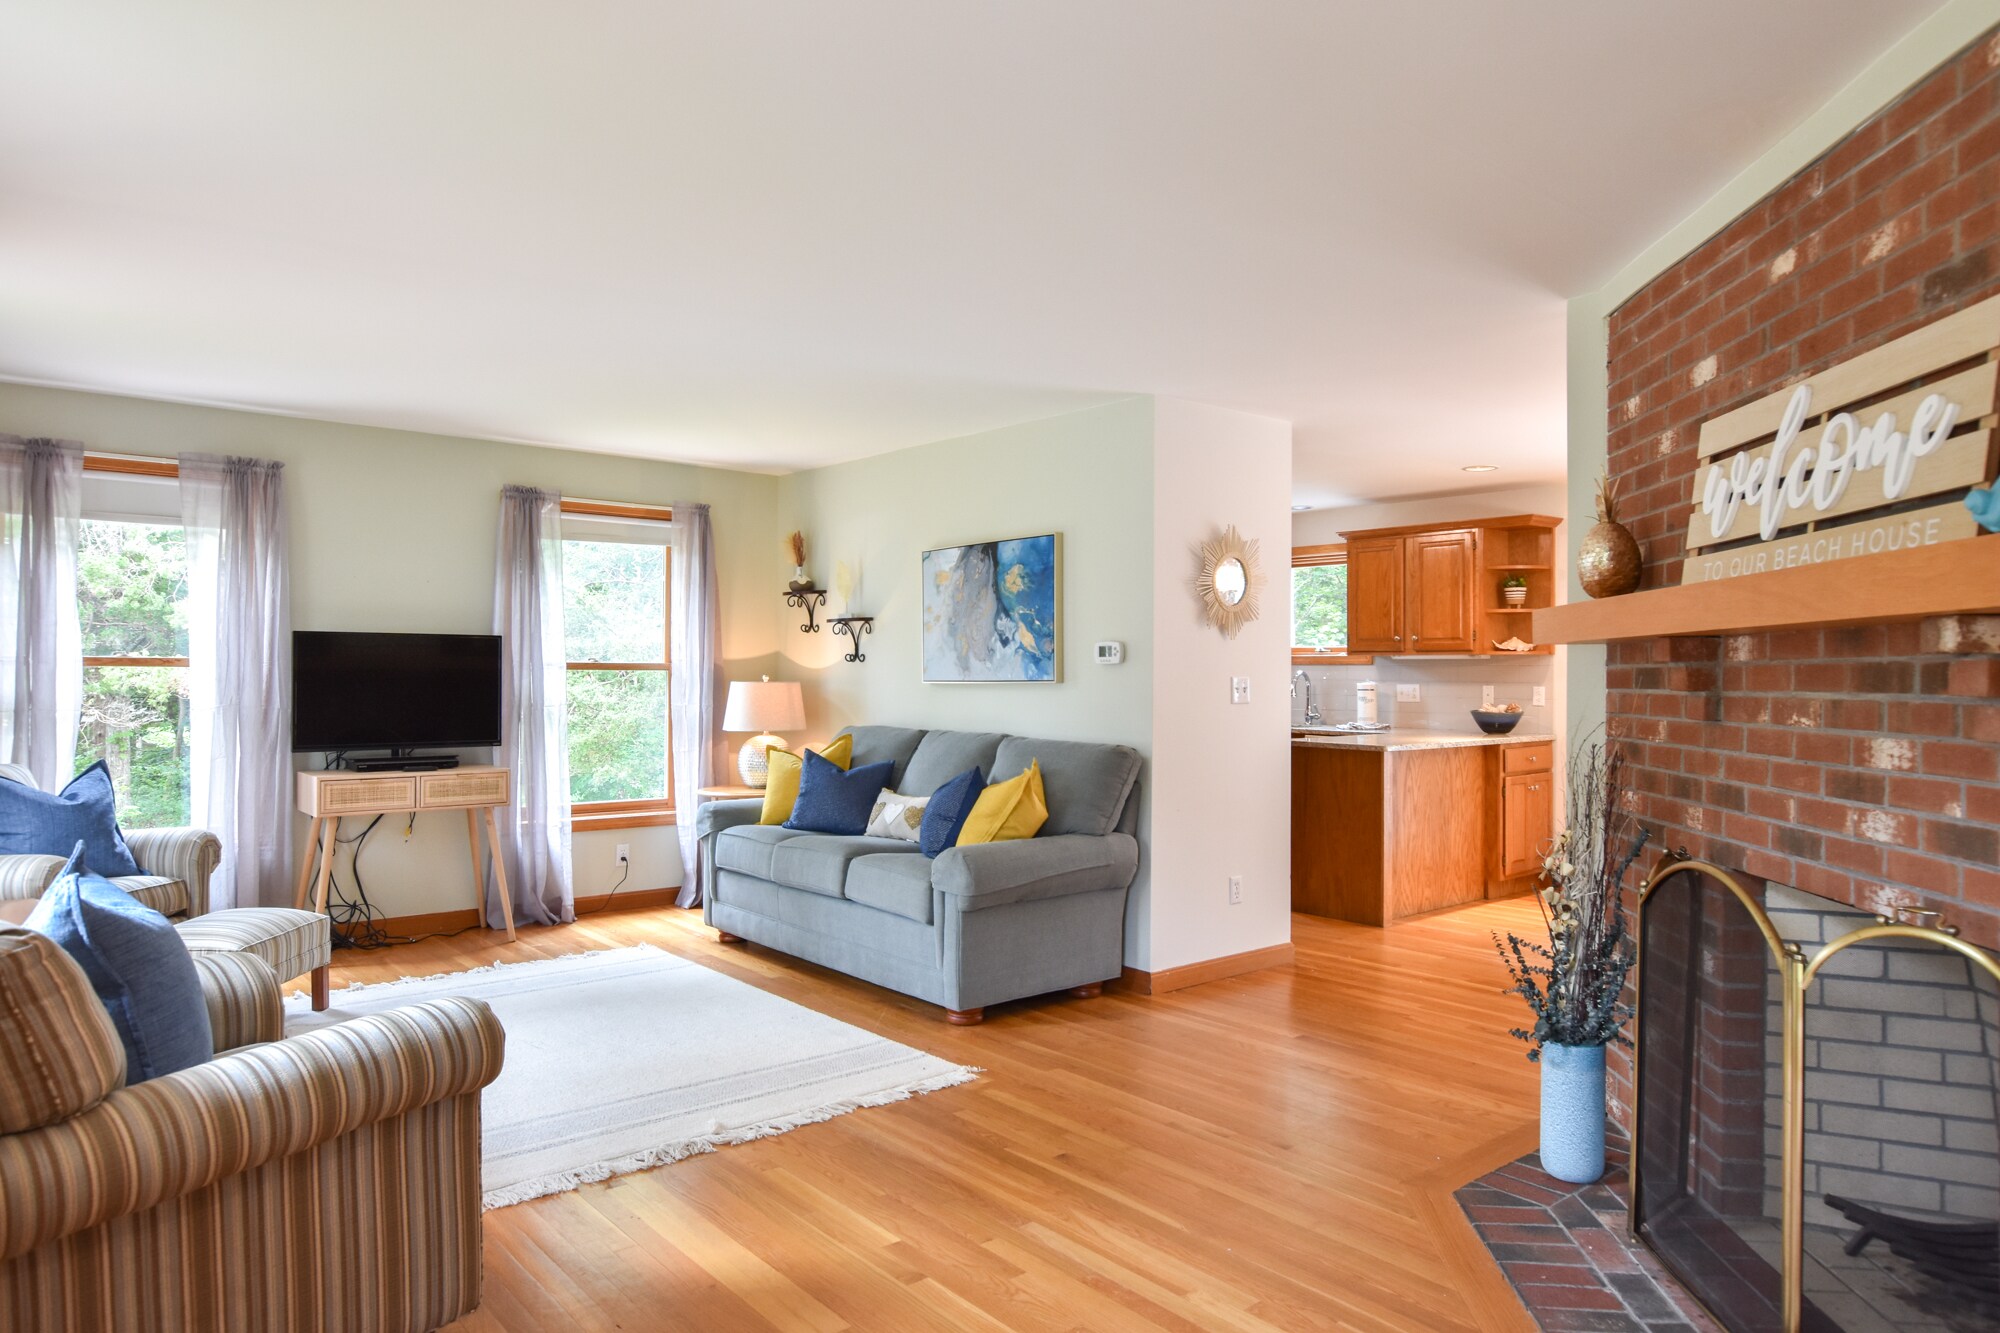 Property Image 2 - 15550: Close to Nauset Beach, Newly Furnished w/ Large Yard & Deck, Outdoor Shower, A/C!